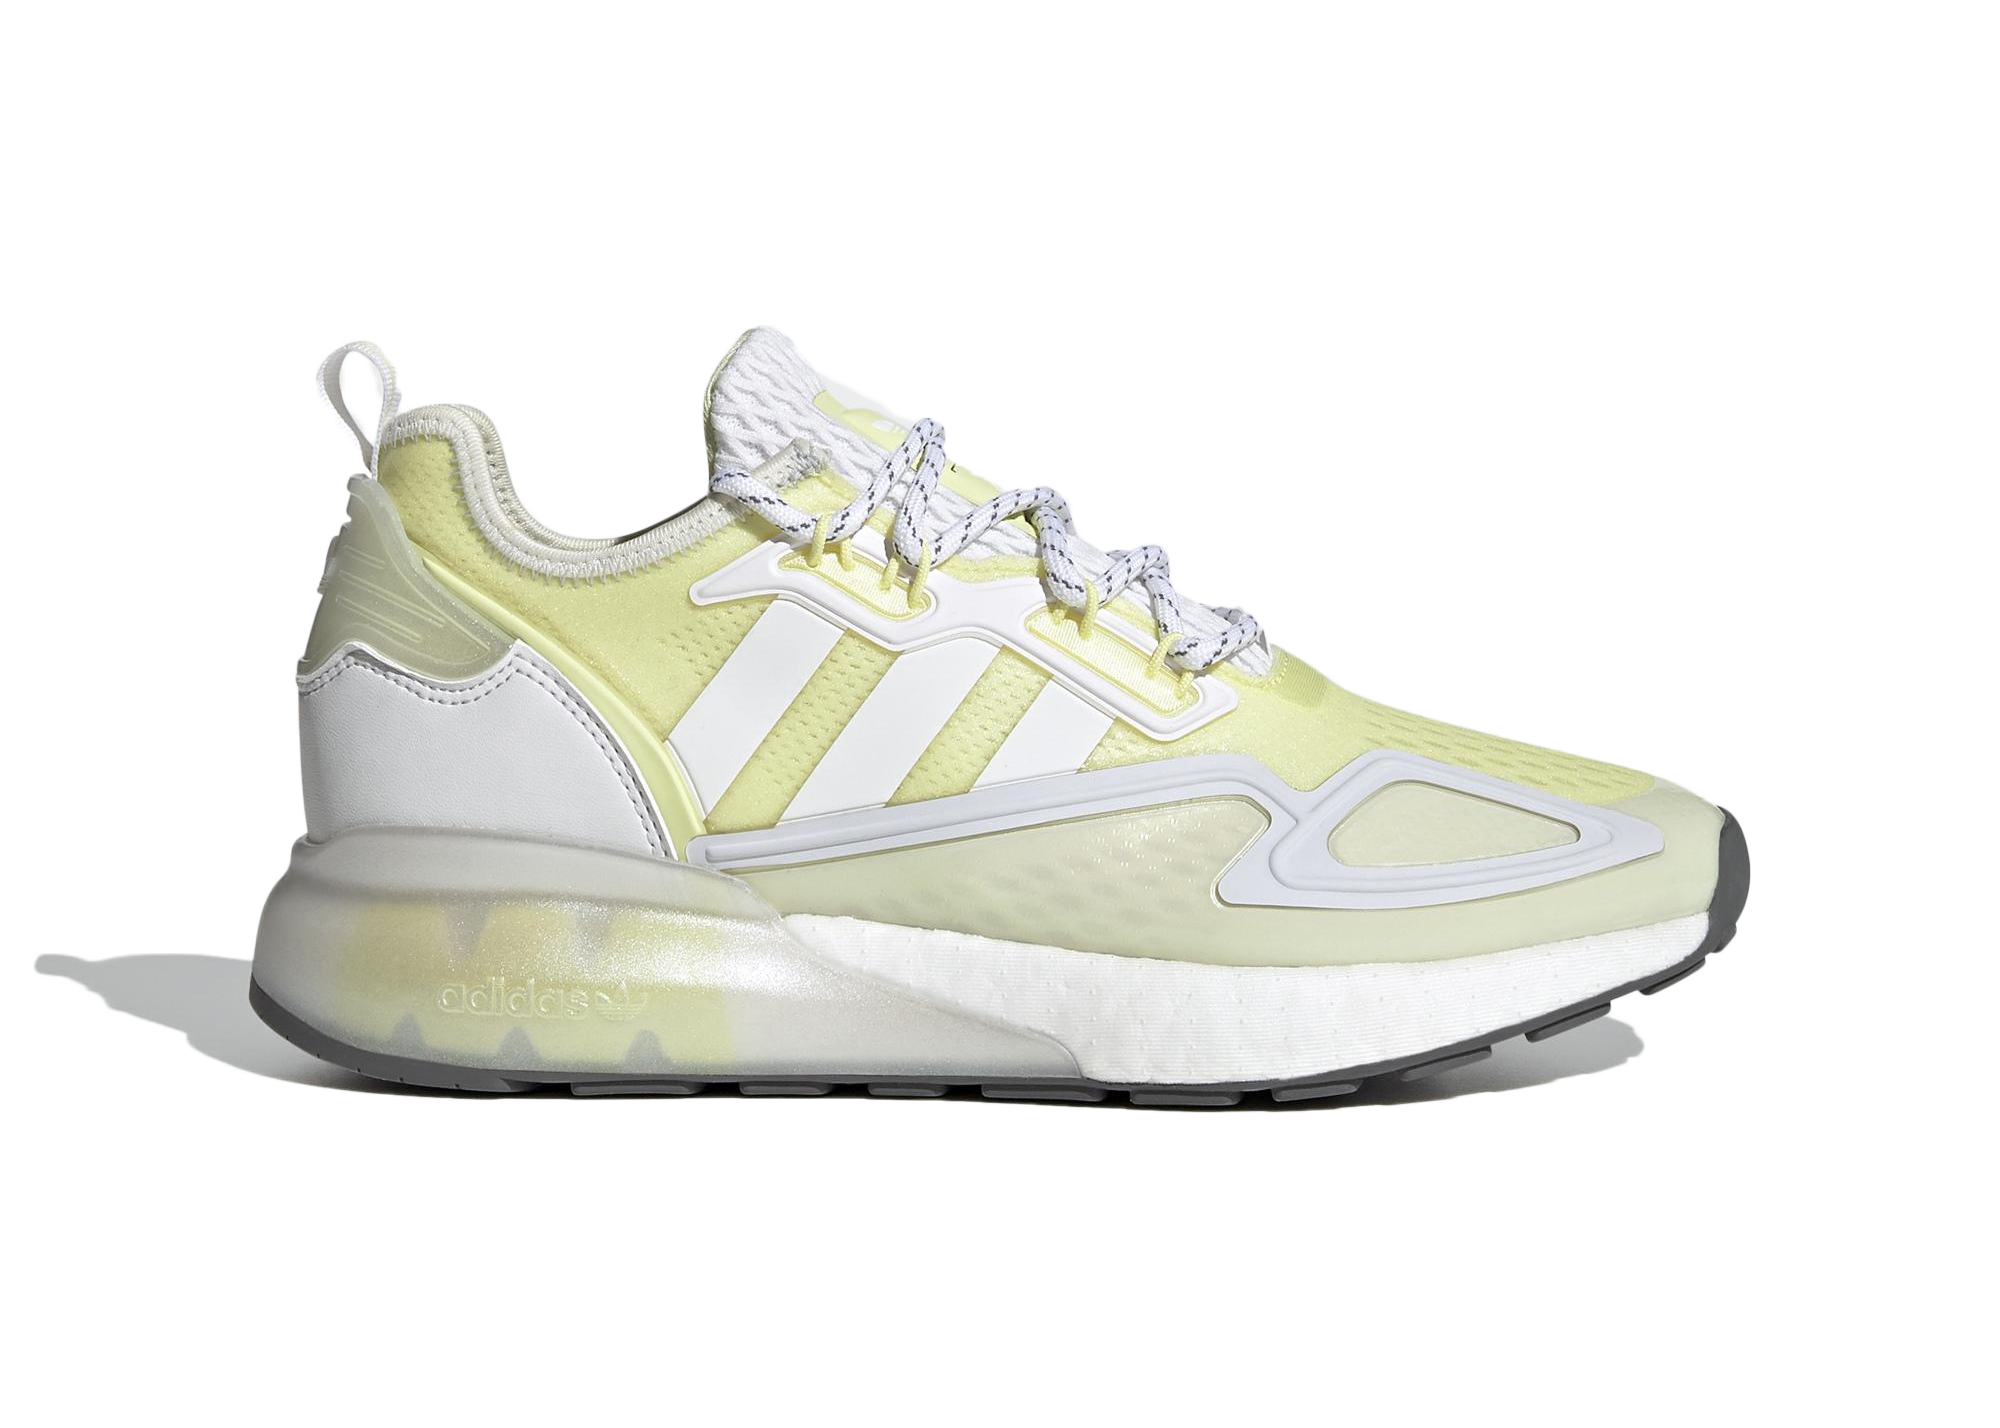 adidas ZX 2K Boost Pure Core White Grey One (Women's) - G55514 - US